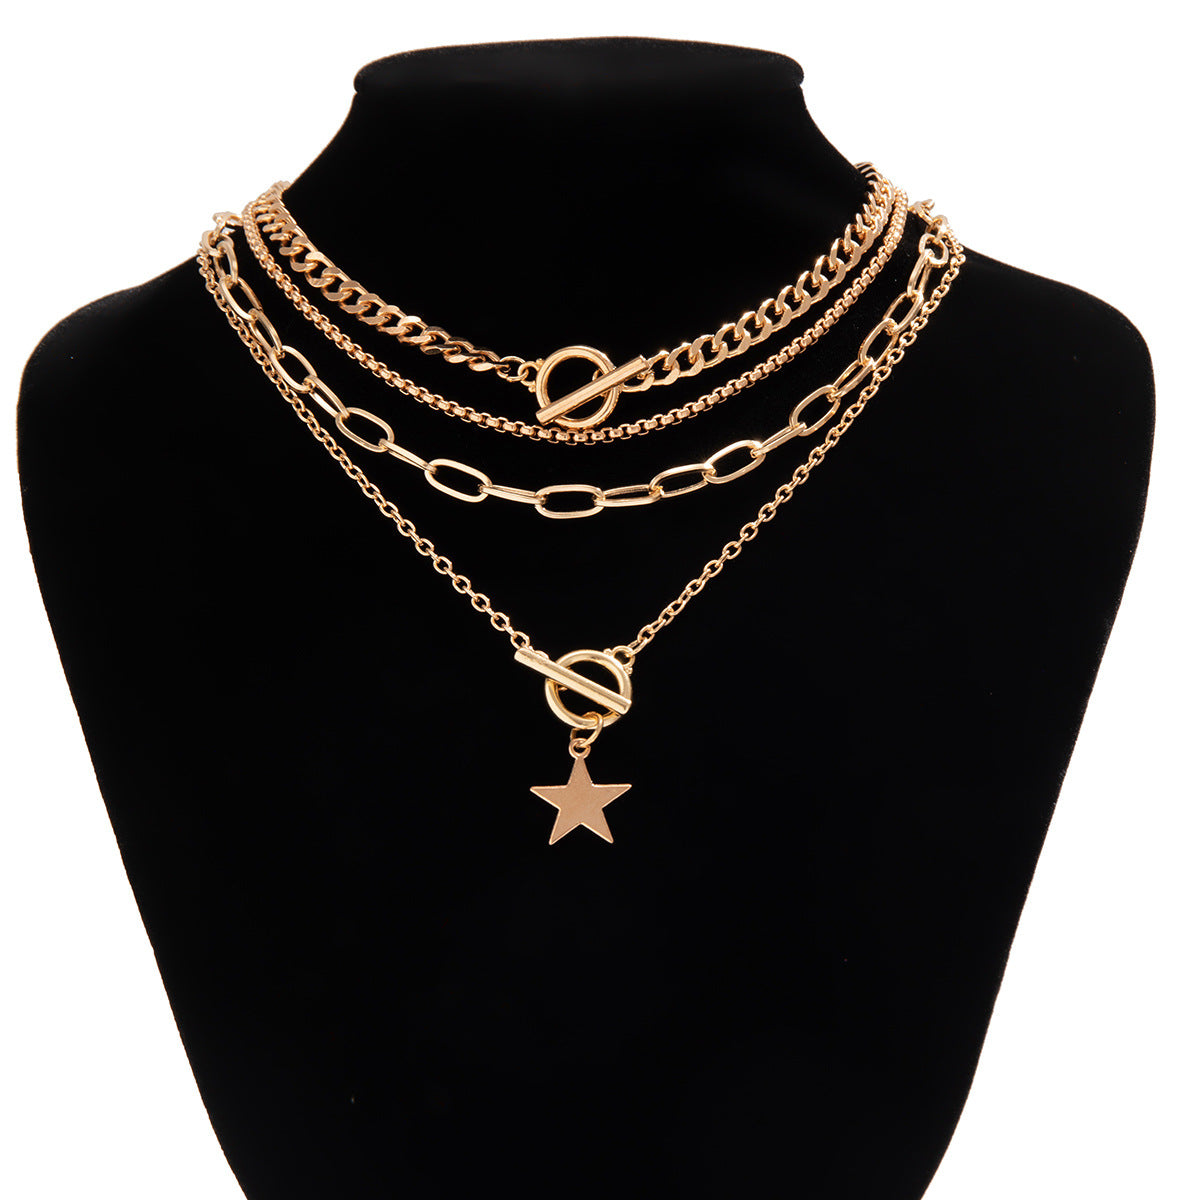 Punk Chain OT Buckle Necklace with European and American Star Pendant